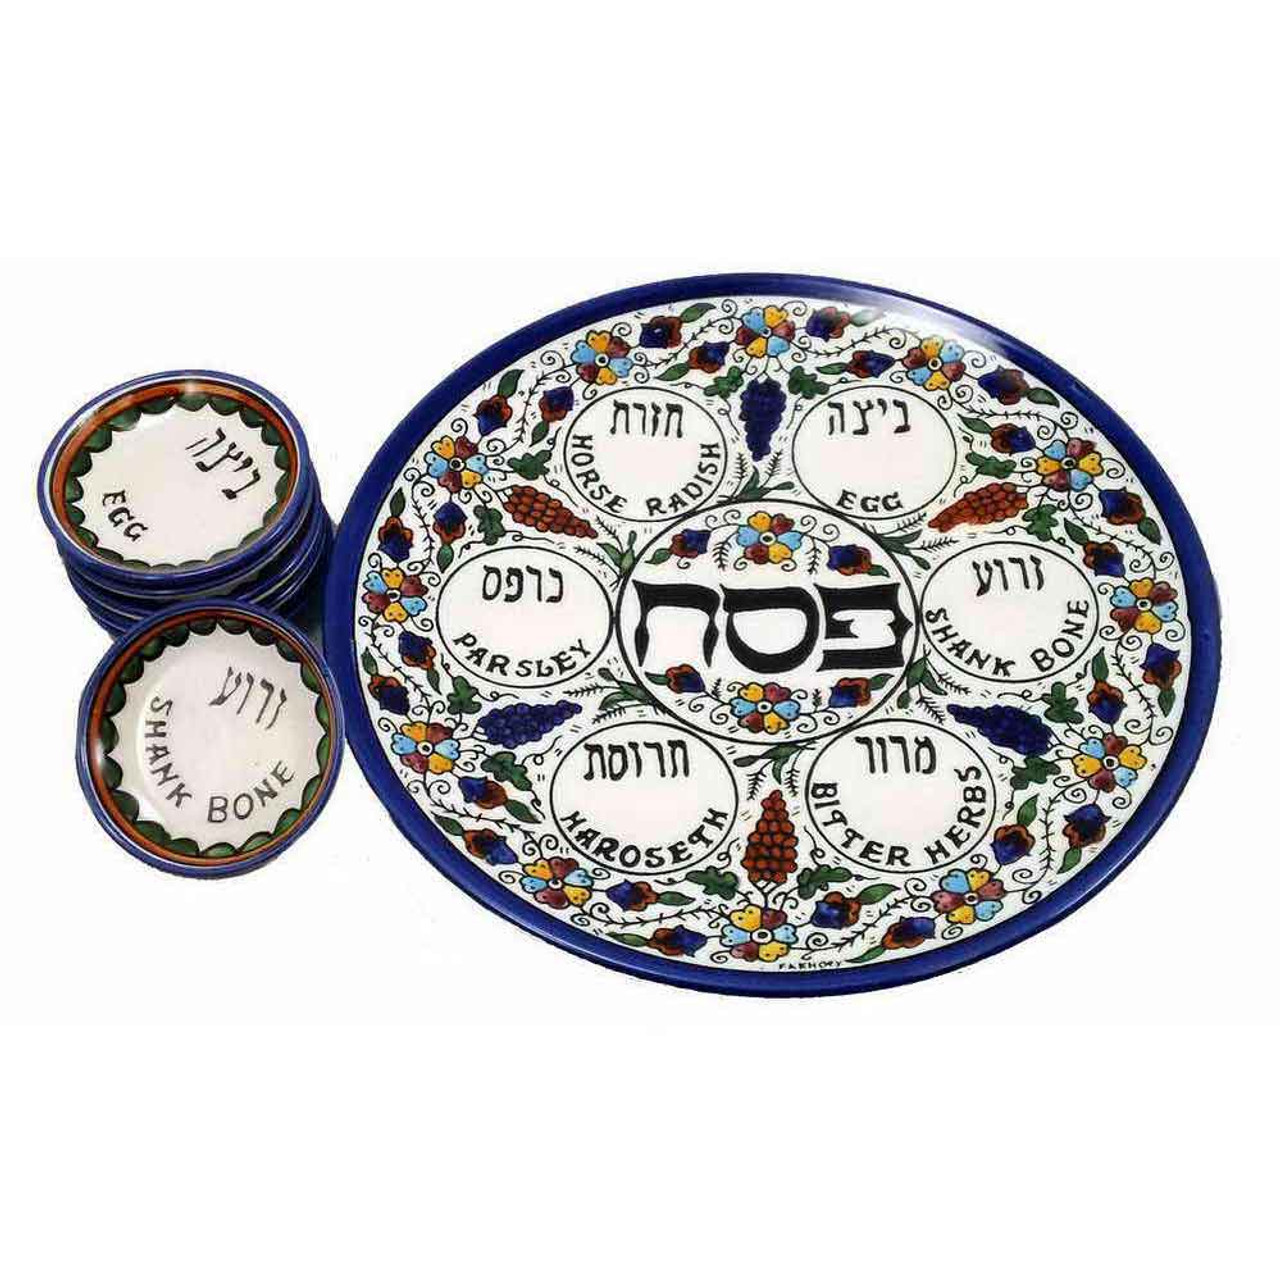 7 Piece Ceramic Seder Plate With Dishes